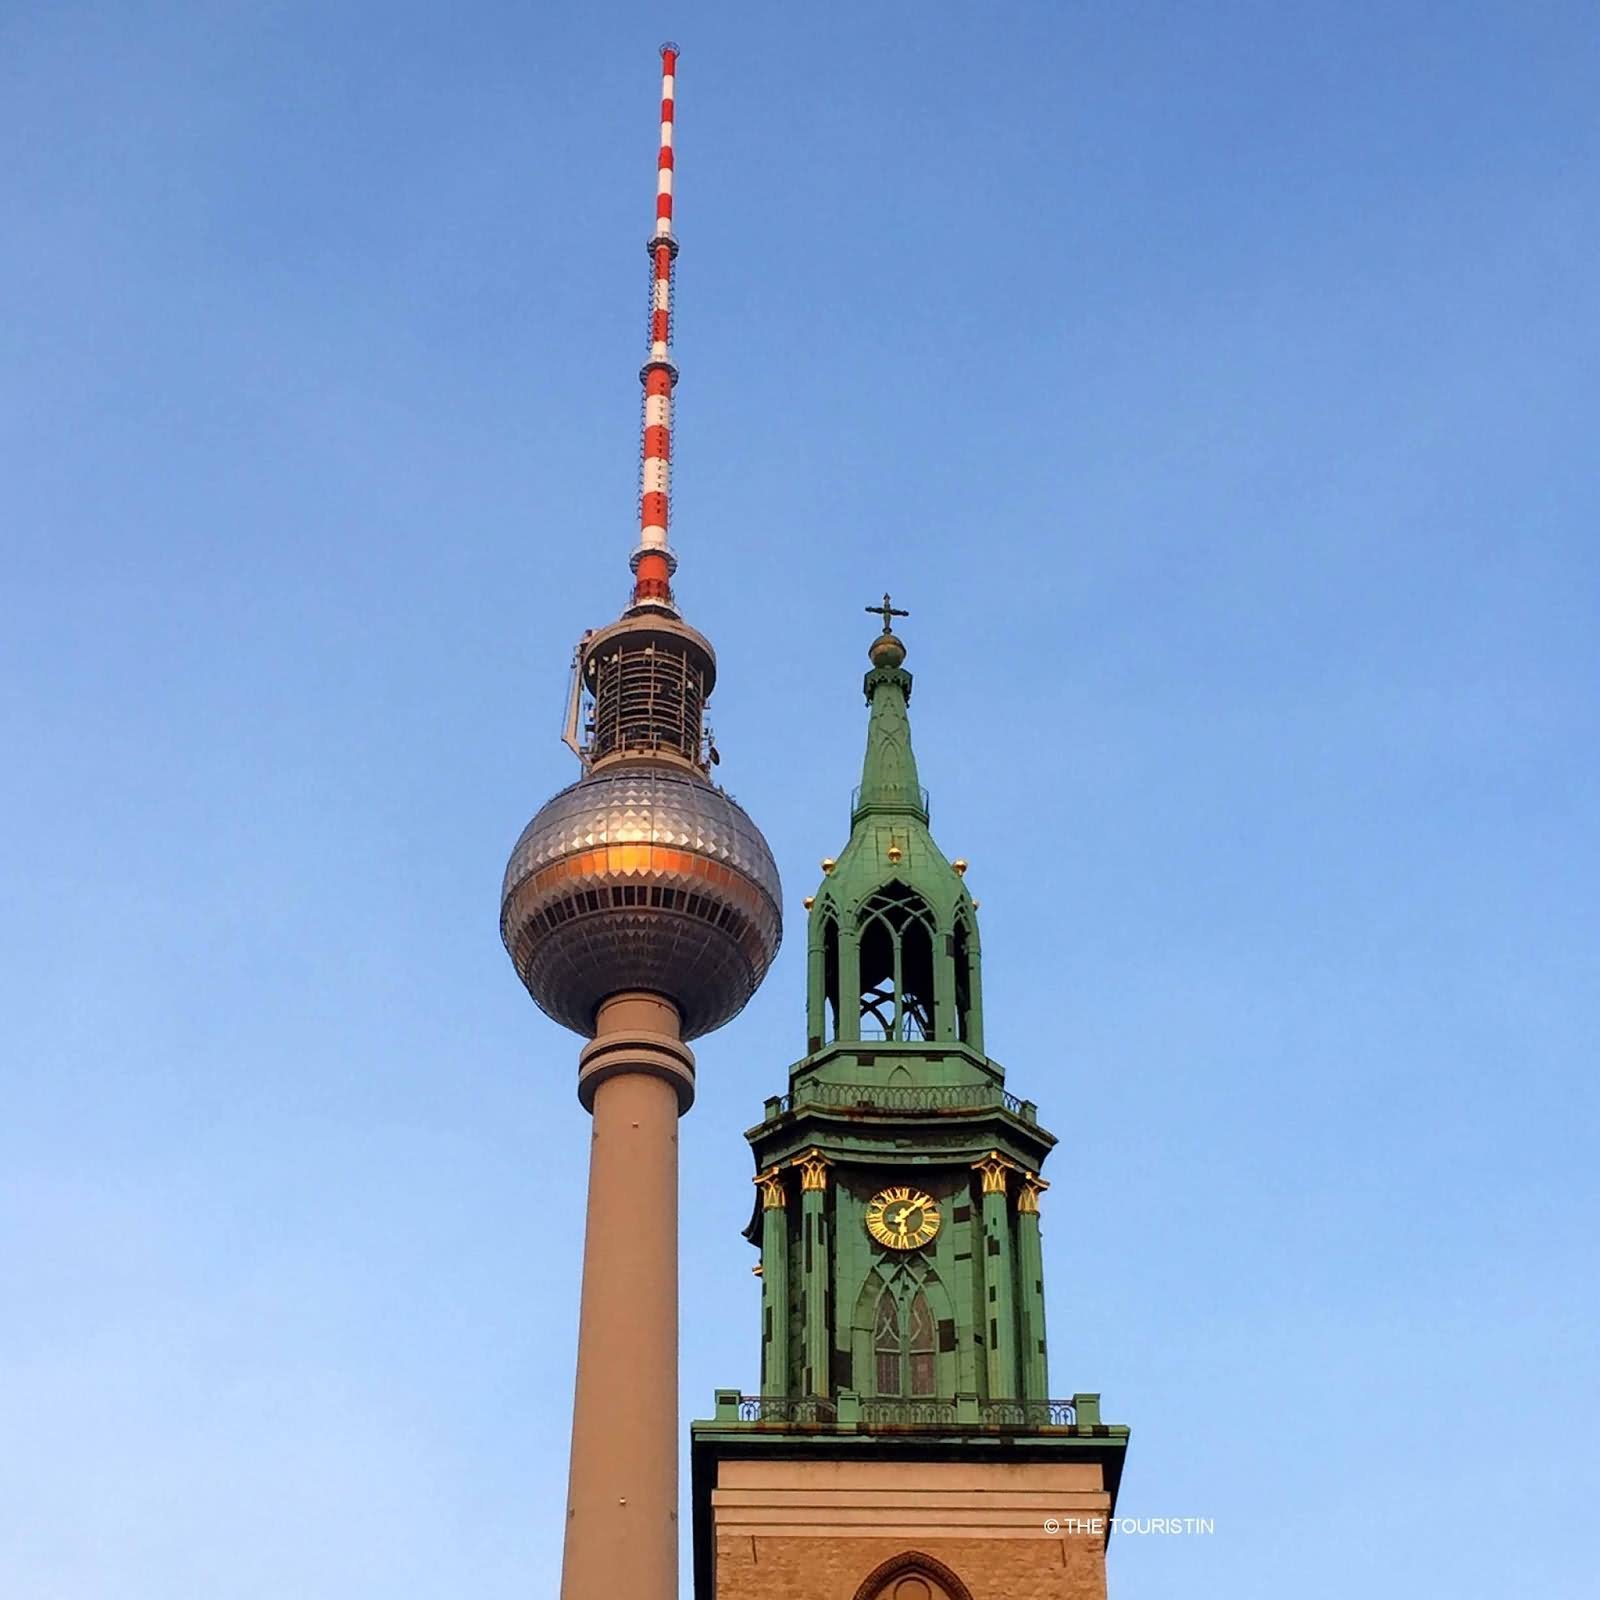 The Fernsehturm TV Tower And St Mary's Church In Berlin